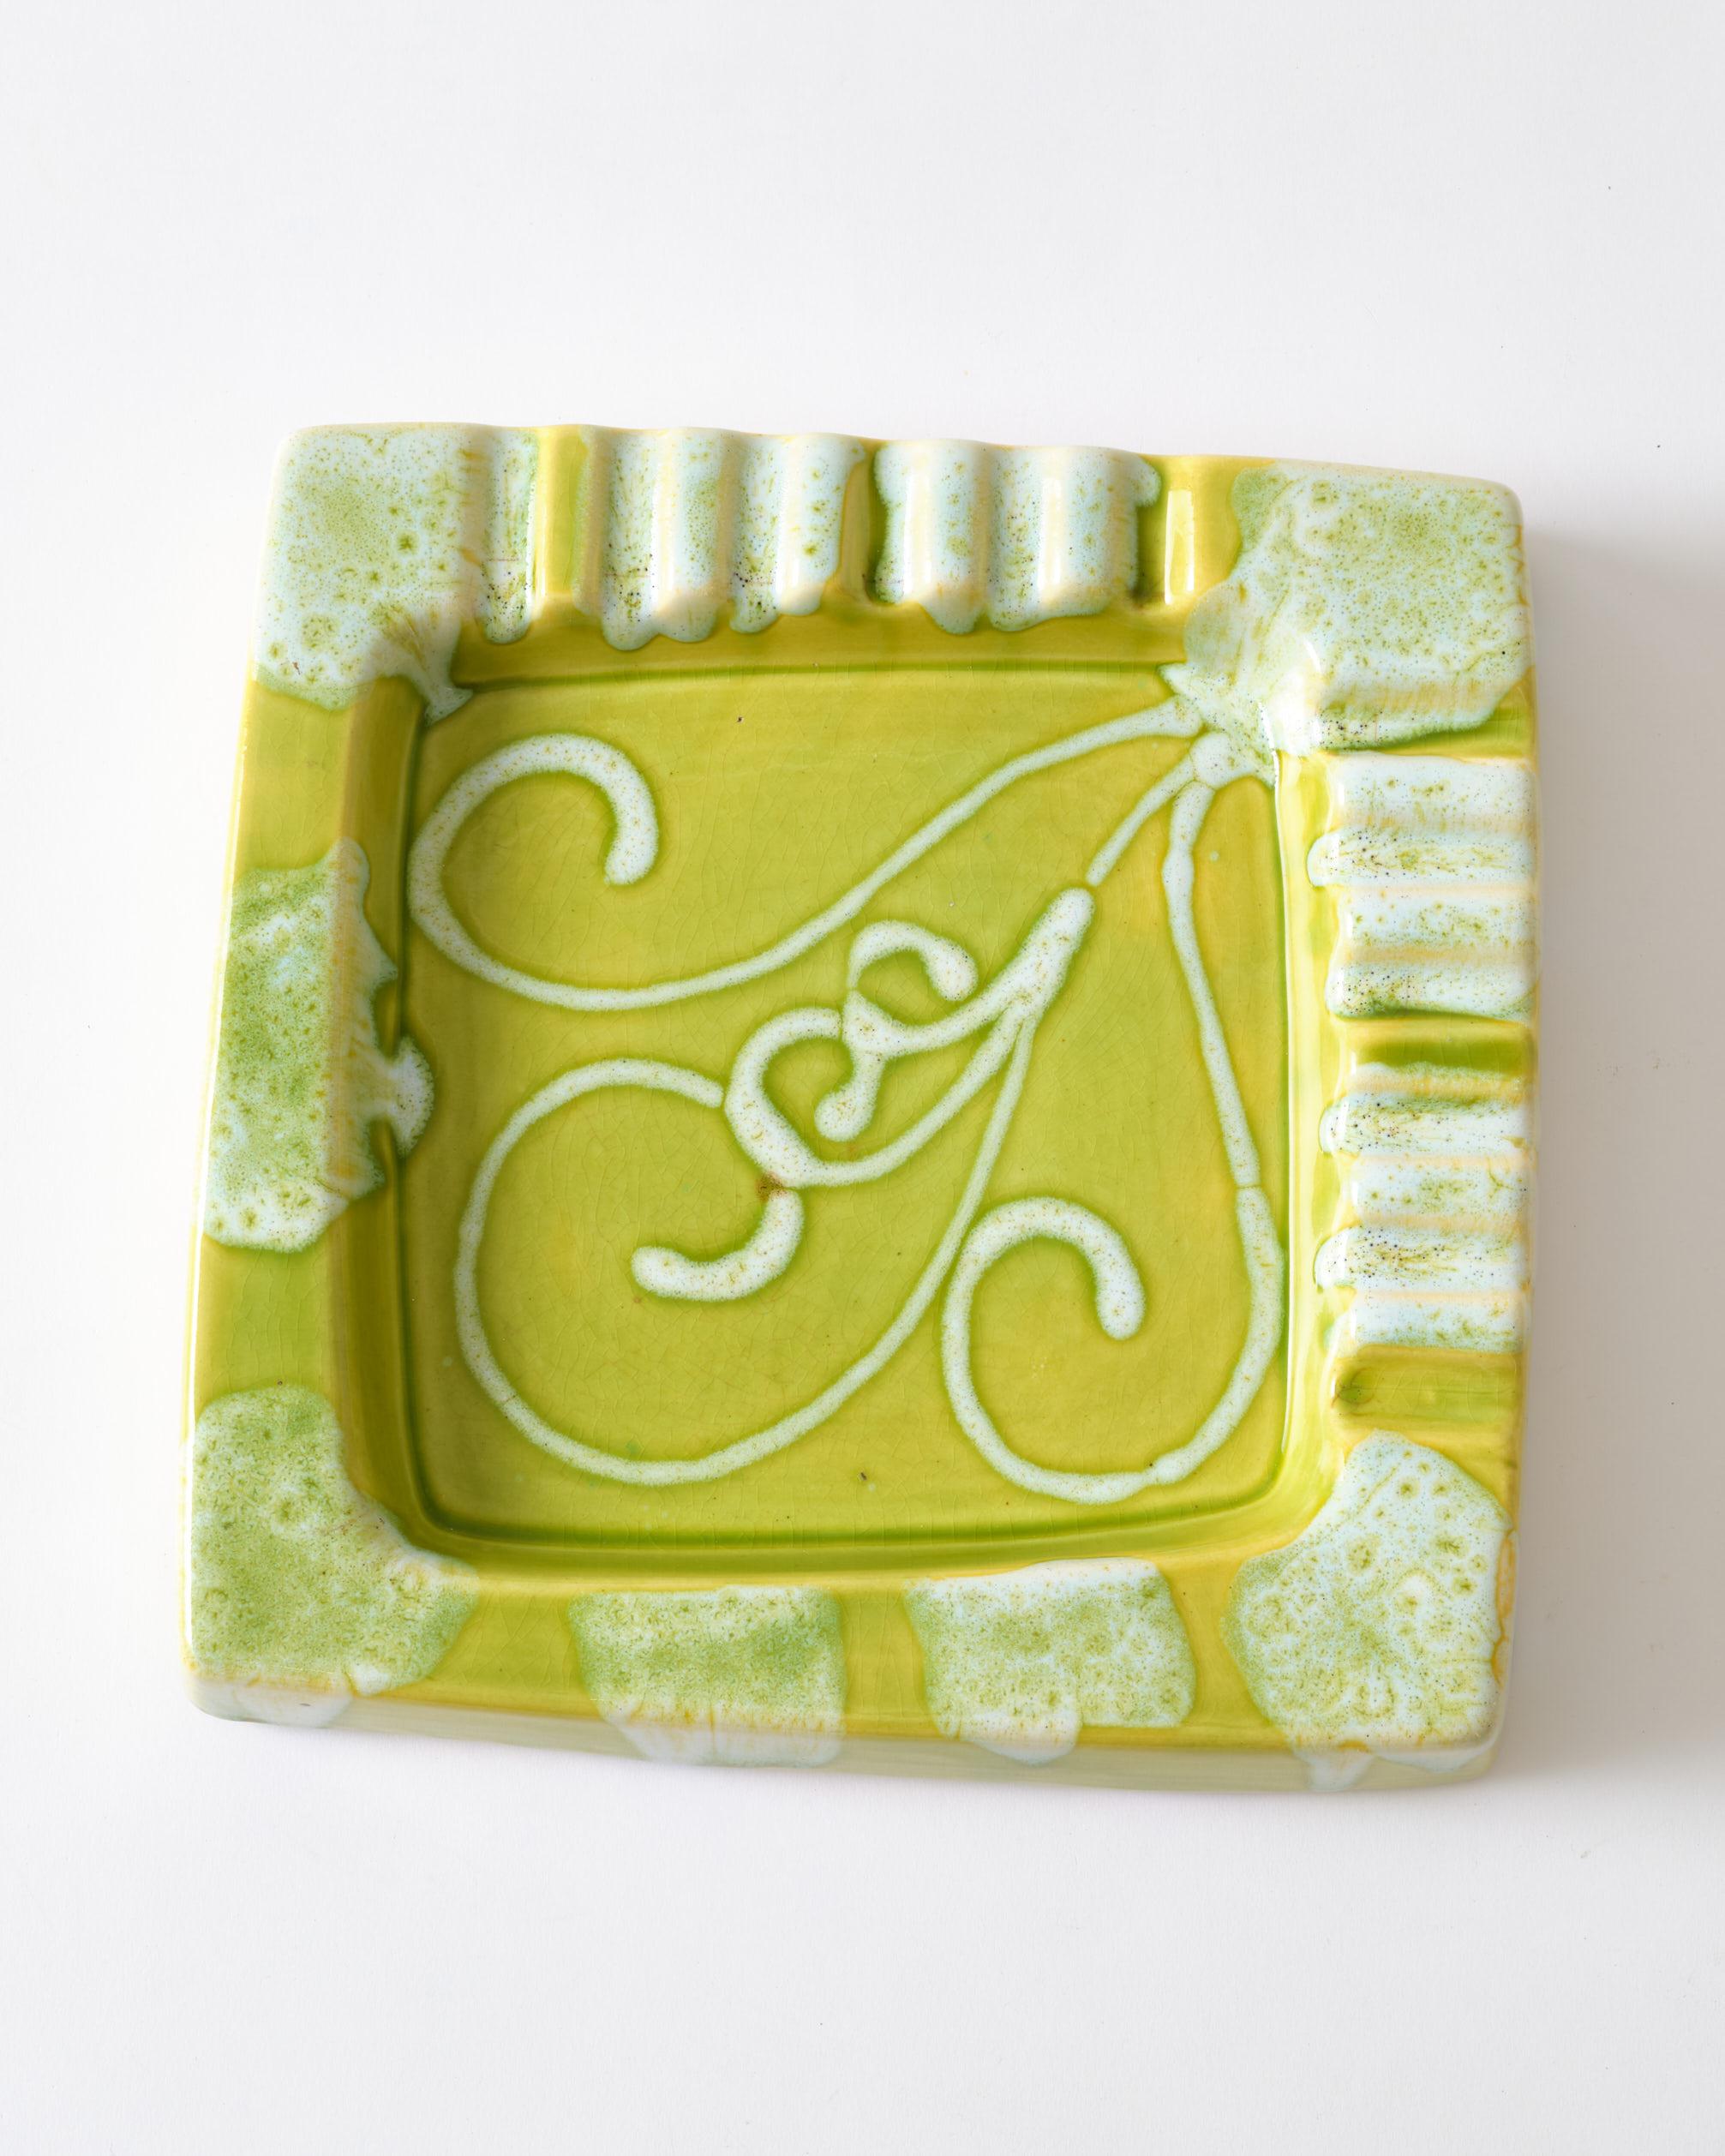 Large lime green ashtray which can be used as a decorative item.
The ashtray has a swirly white pattern inside the bowl and white pouring effect on the edges. The item is from the 1950's.